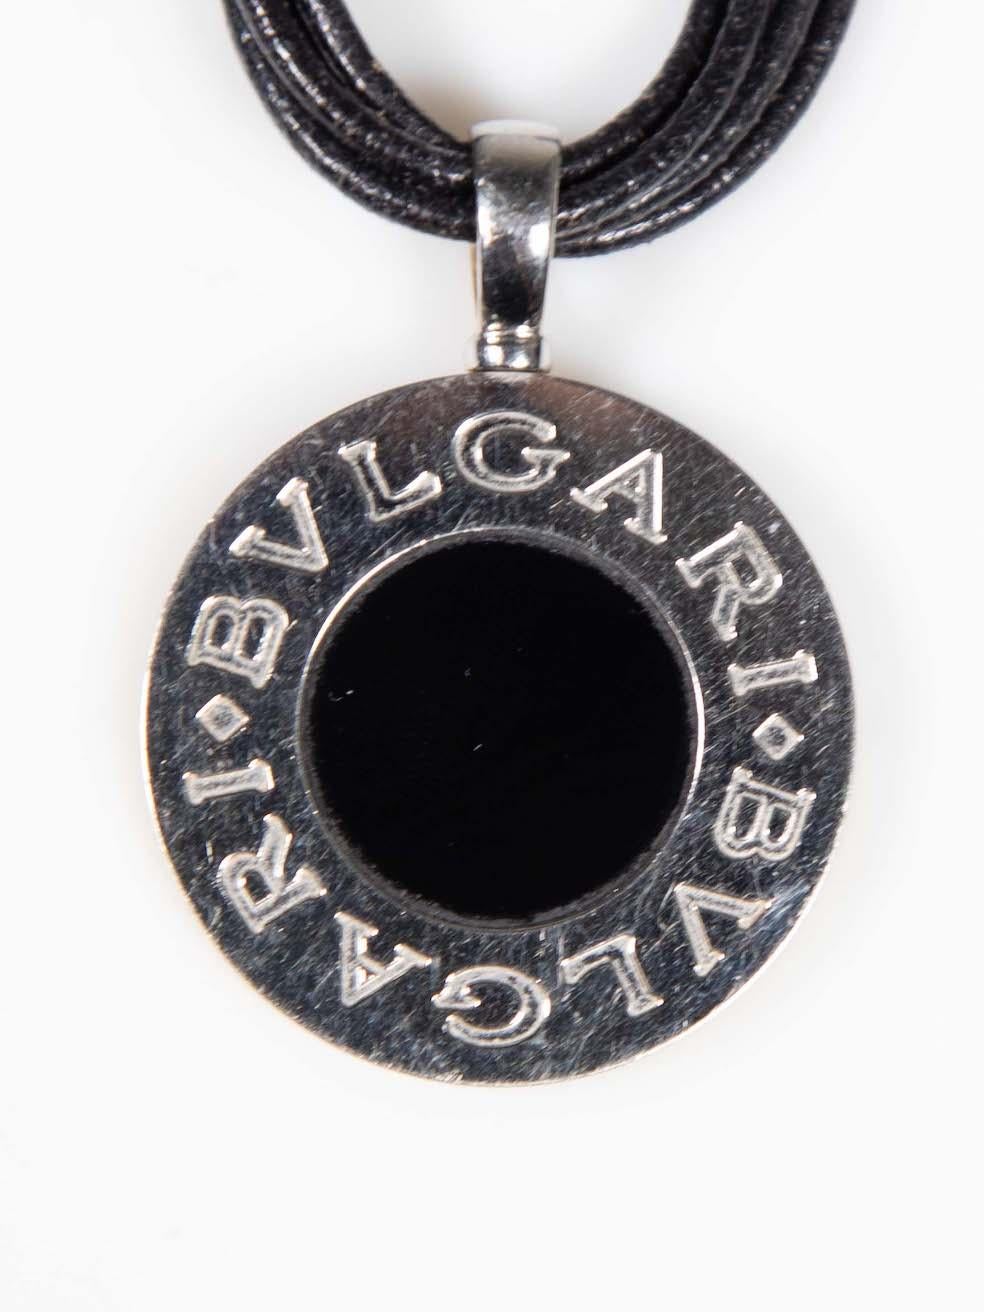 CONDITION is Very good. Minimal wear to necklace is evident. Minimal wear to the pendant with light scratches to the metal on this used Bvlgari designer resale item.
 
Details
Black
18K Gold Steel Onyx
Necklace
Reversible
Mother of Pearl Tondo